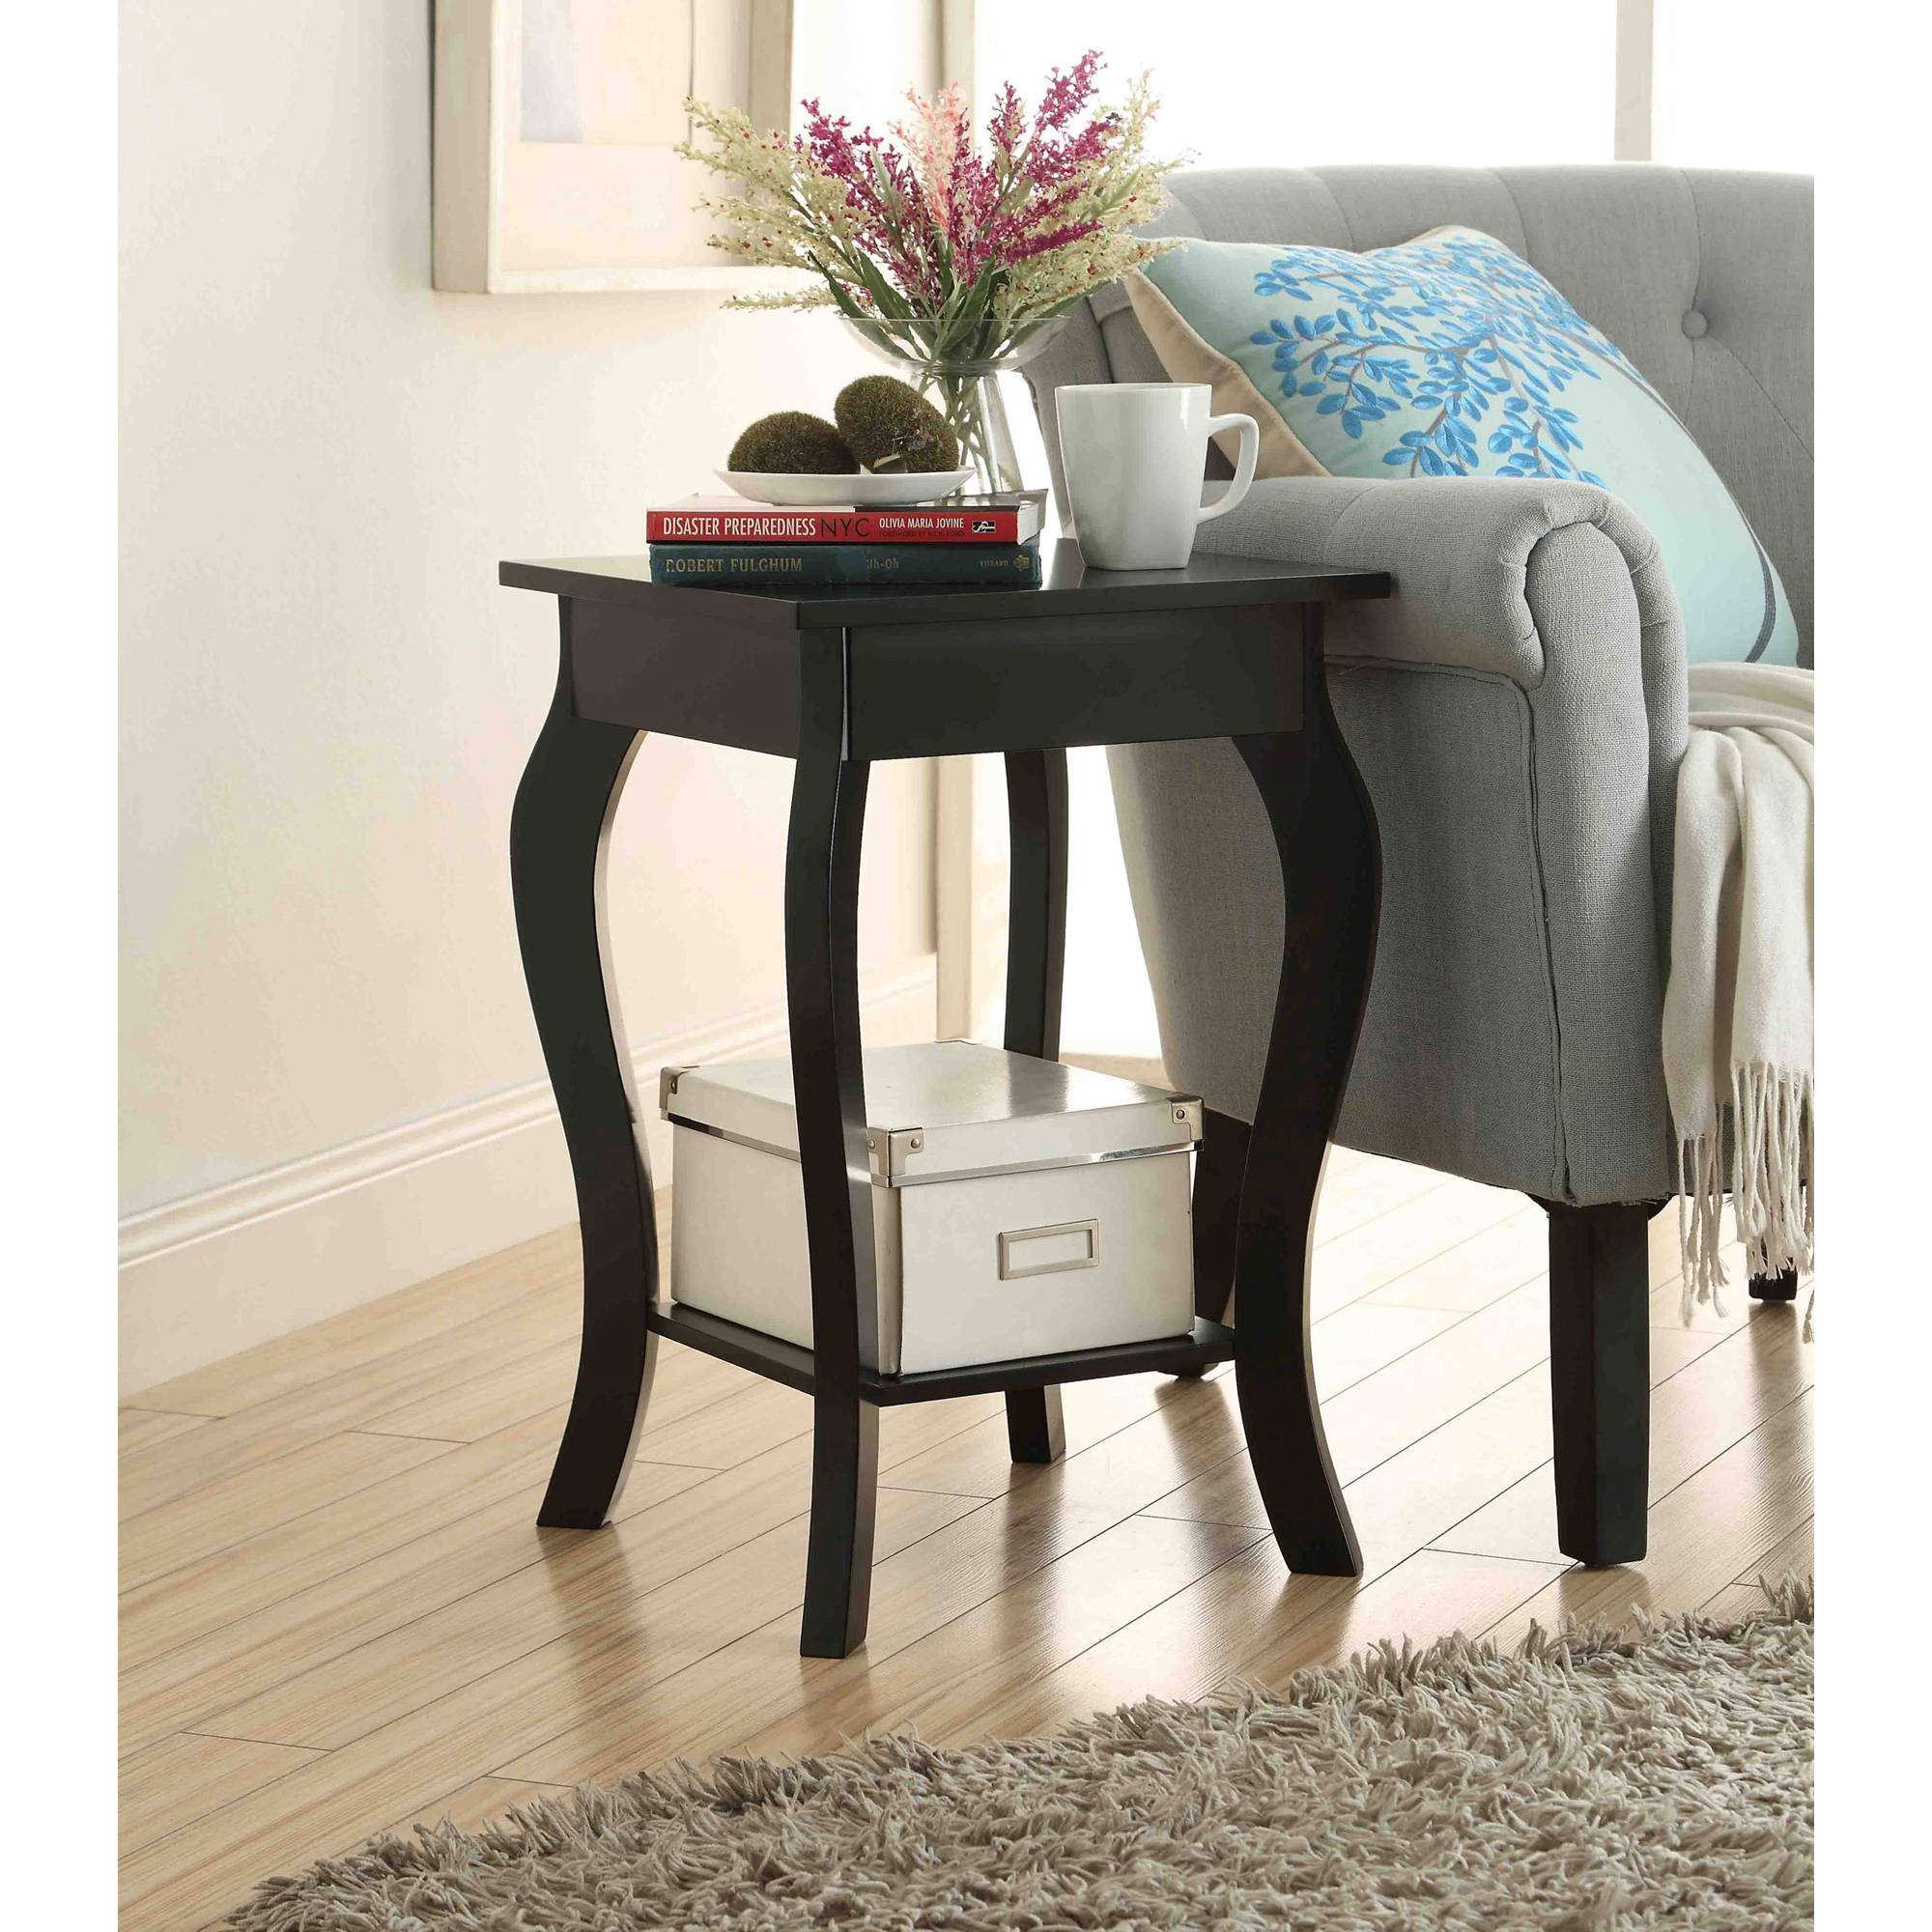 invalid category accent table under small black nest tables value furniture coffee legs ikea cool floor lamps pier one tures vintage wood end hampton bay patio chairs target